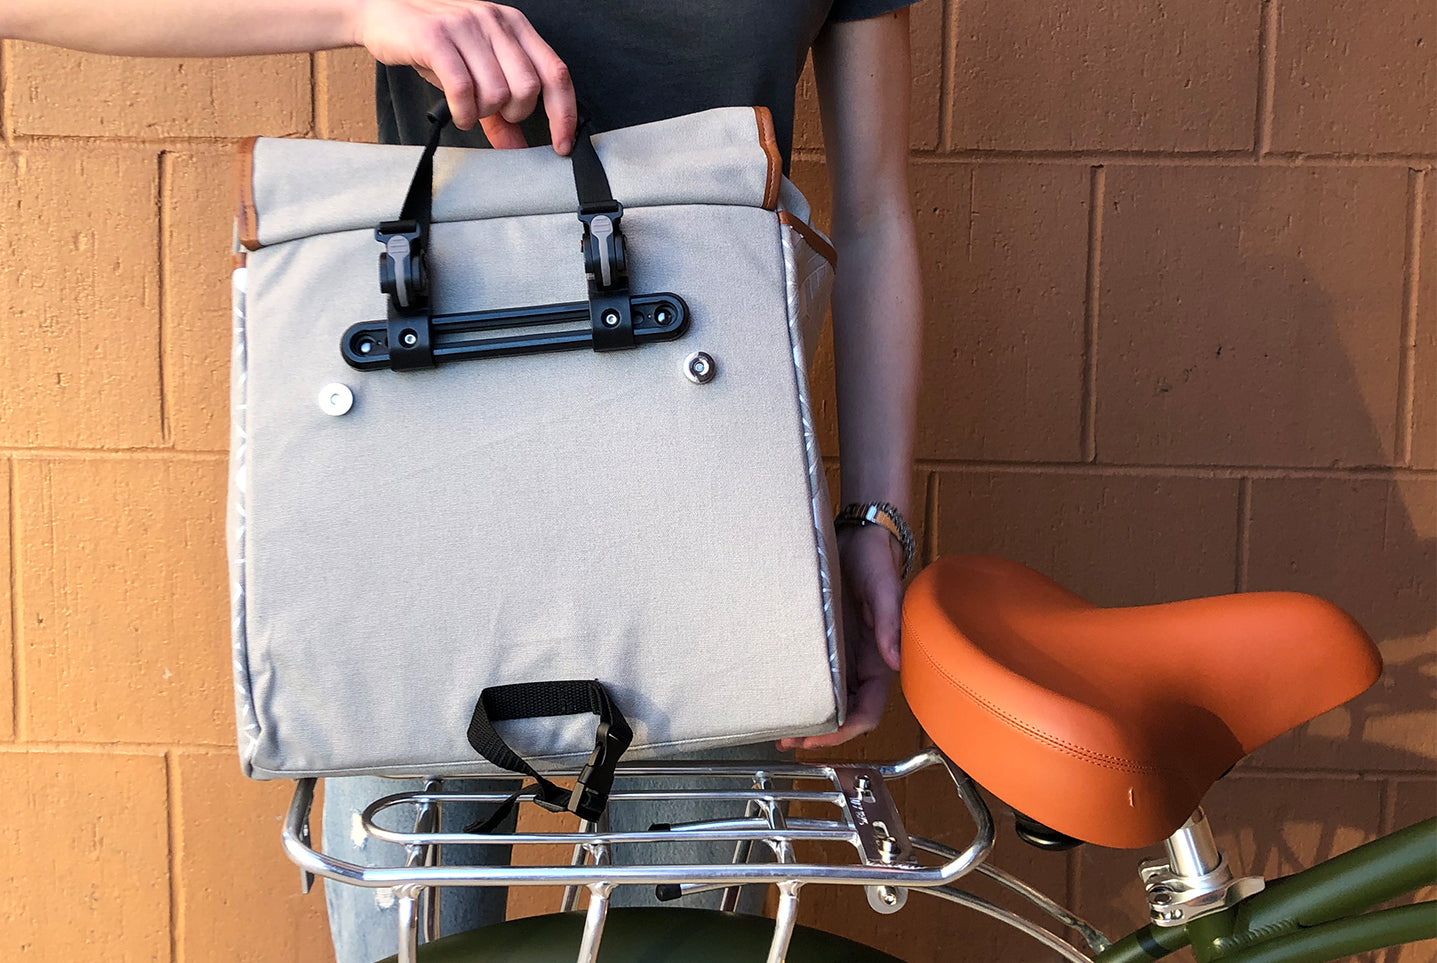 174HUDSON Pannier Tote Bag in use on a bicycle